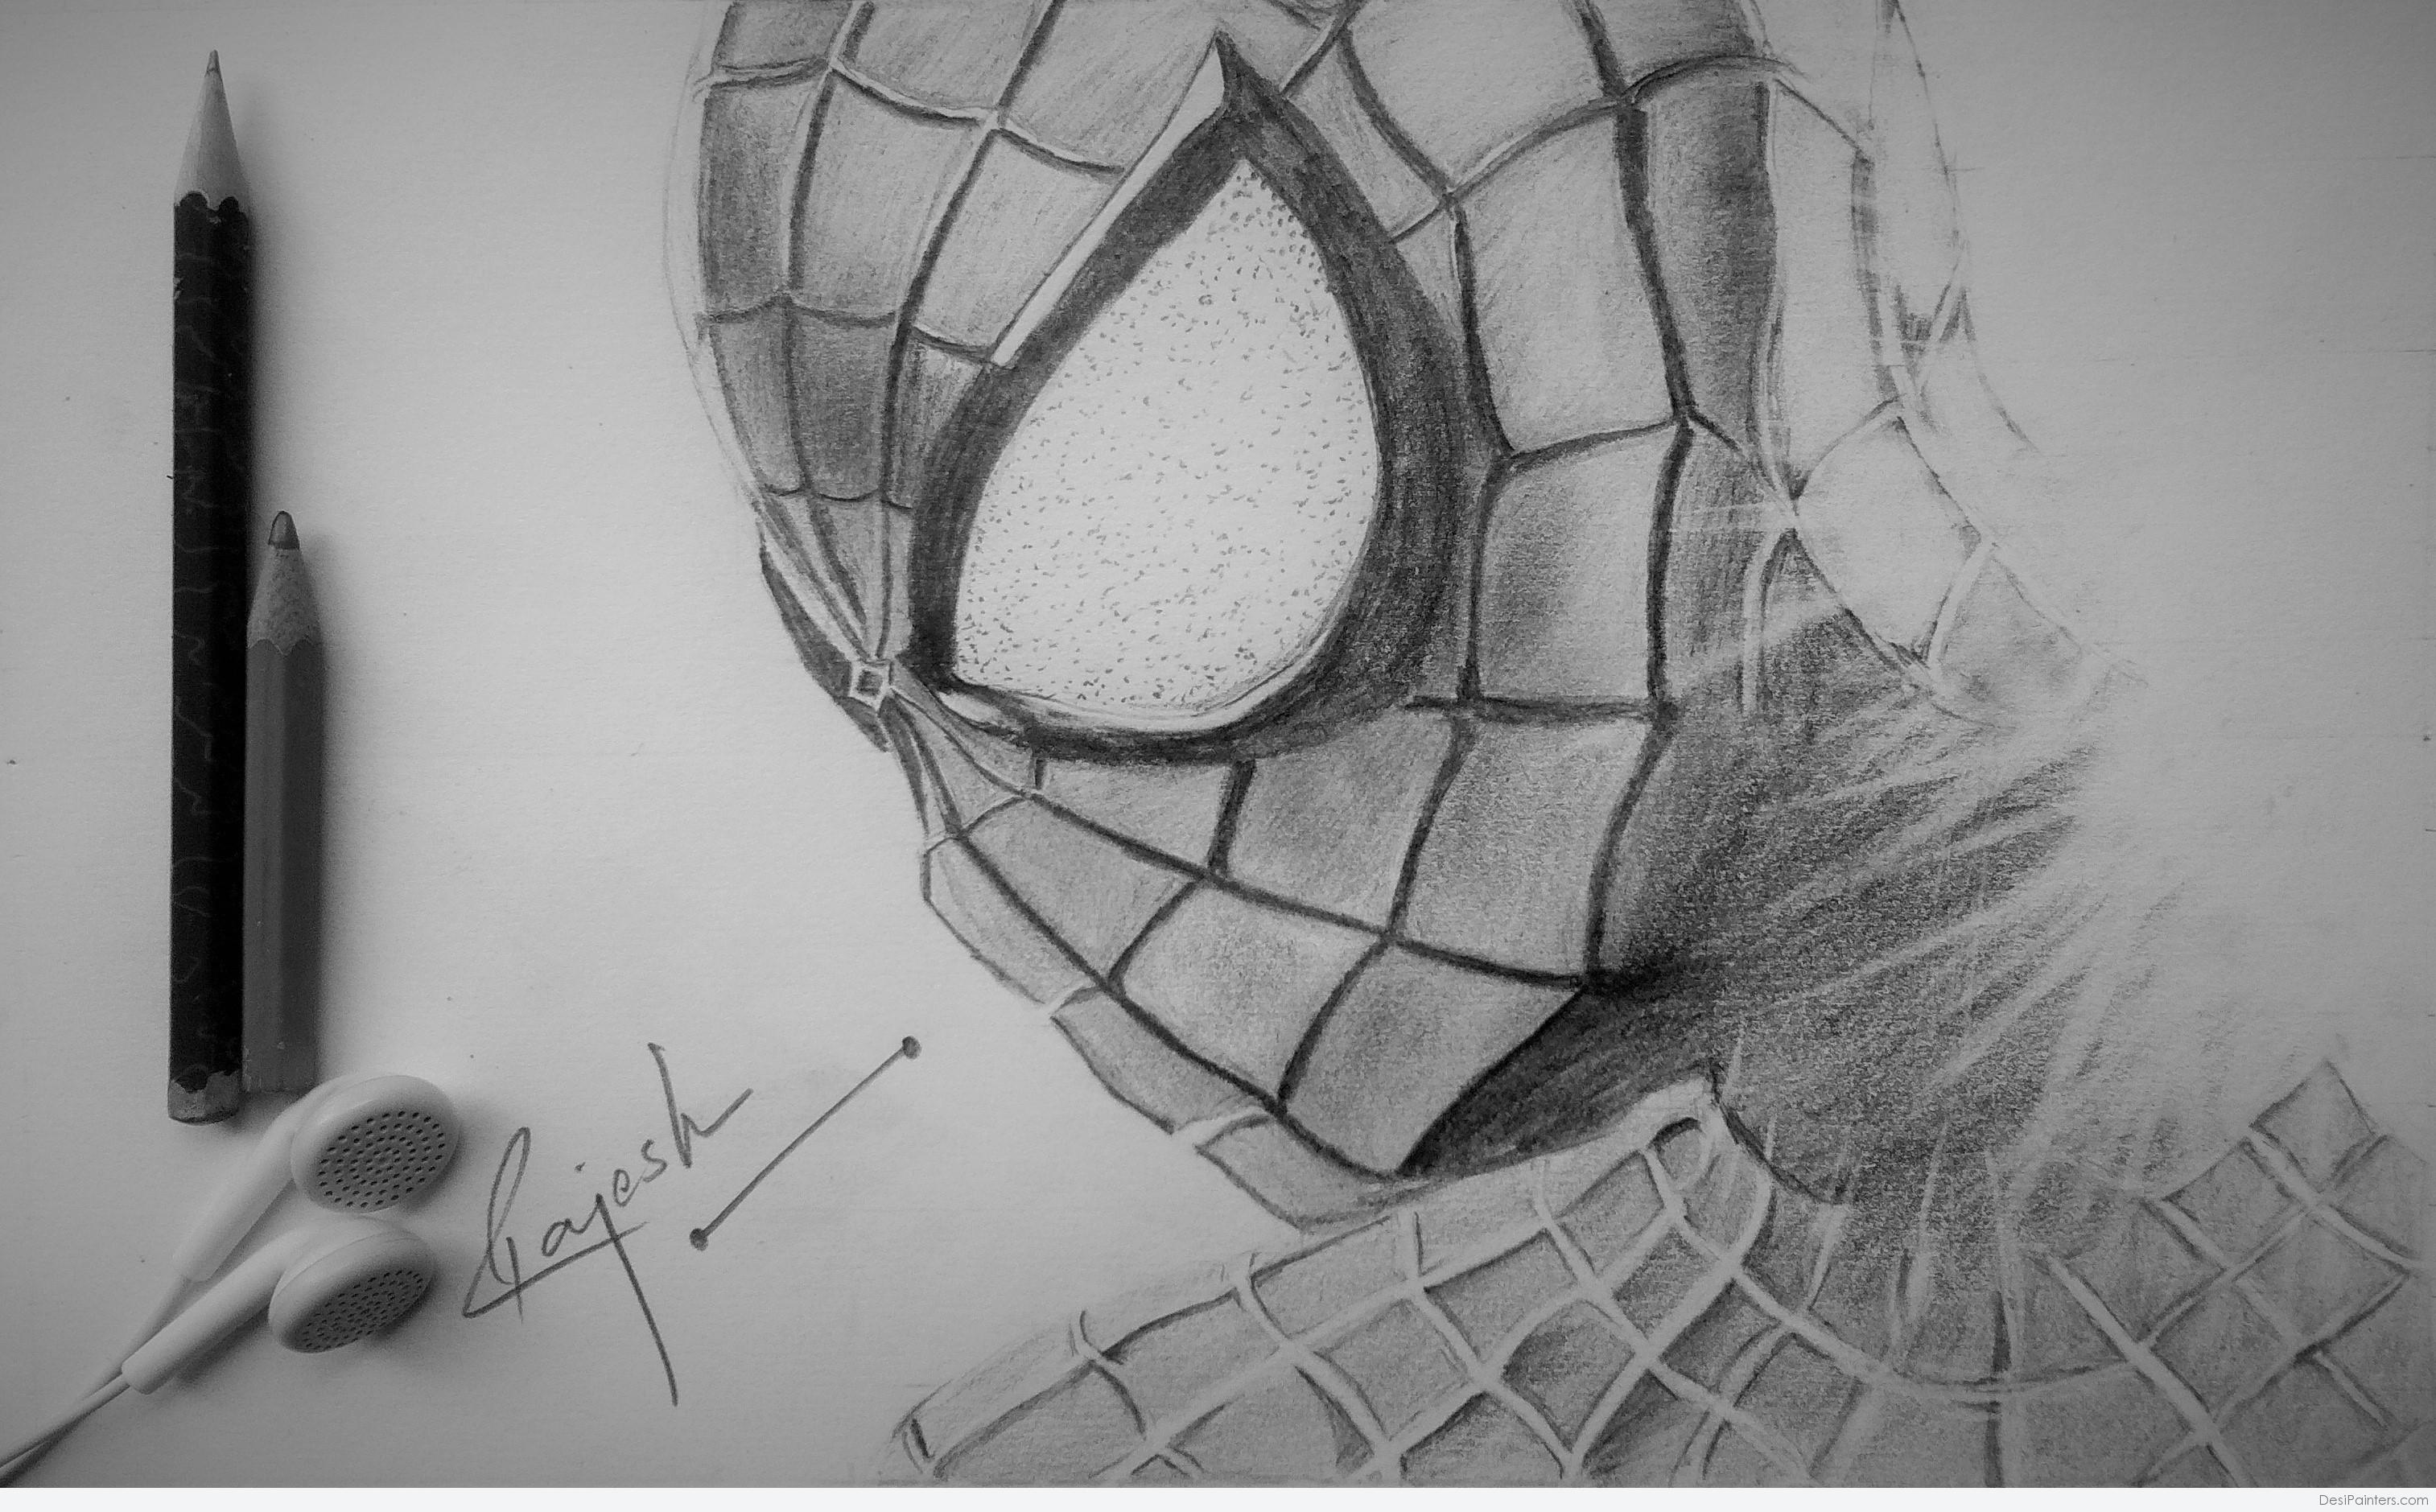 Awesome Pencil Sketch Of Spider Man | DesiPainters.com